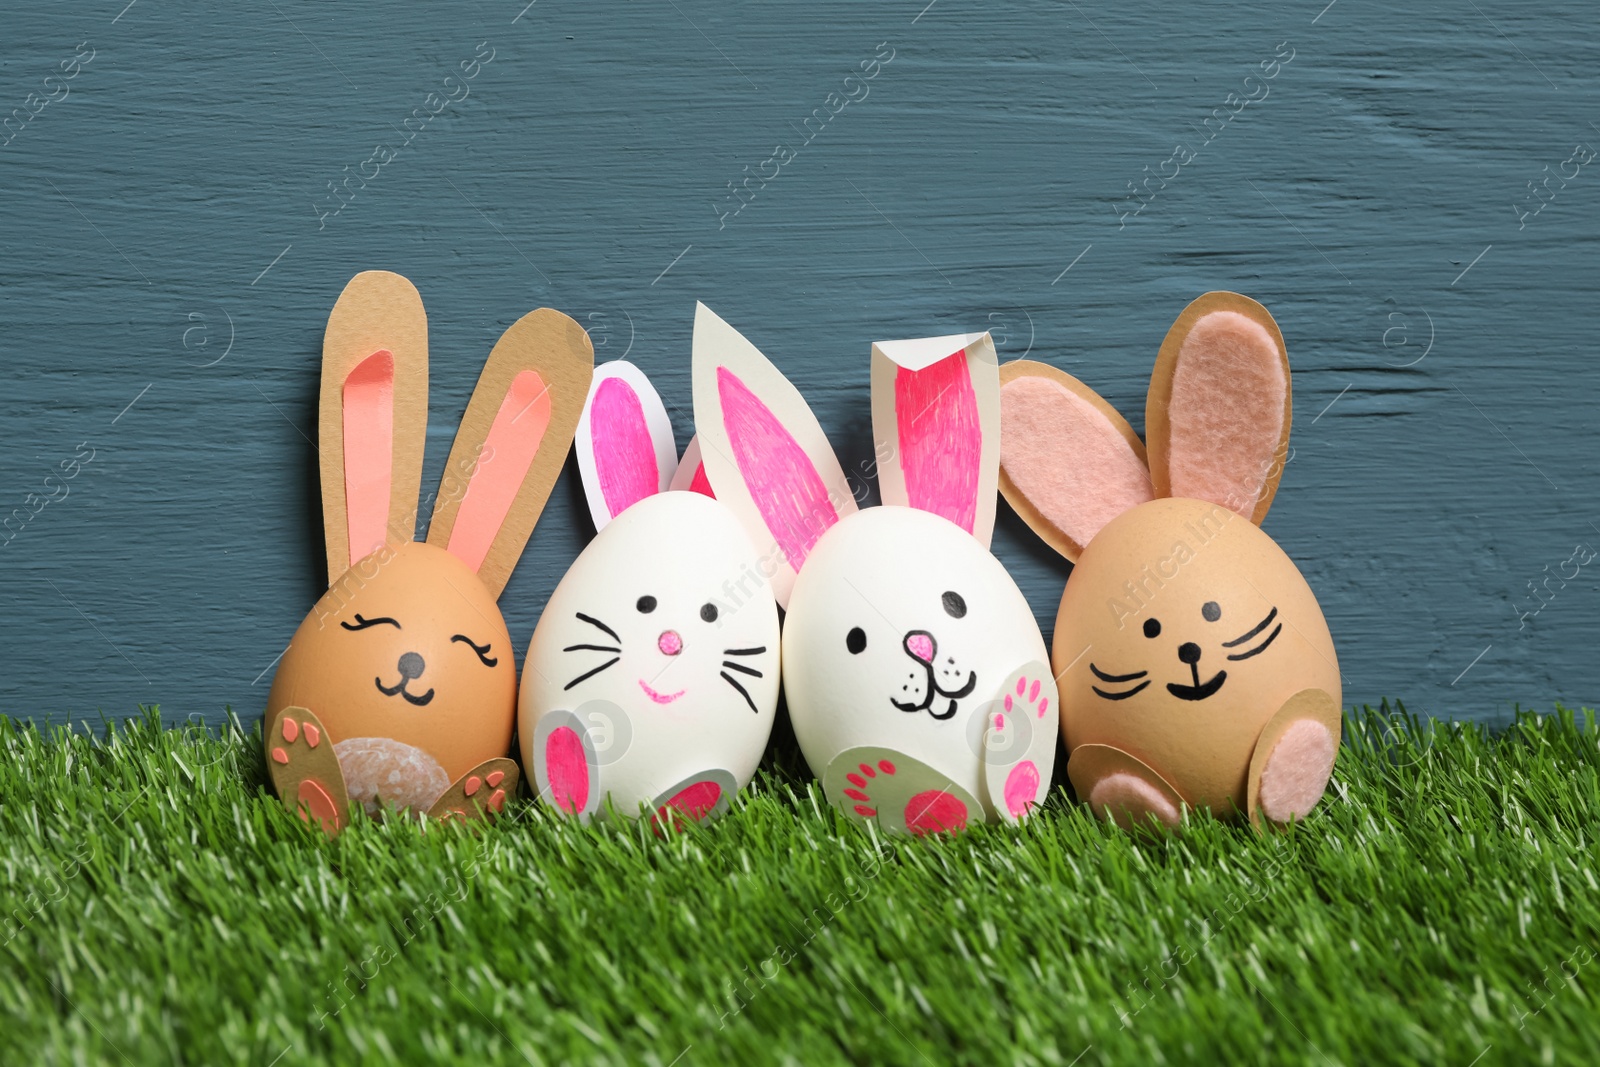 Photo of Easter eggs as cute bunnies on green grass against blue wooden background